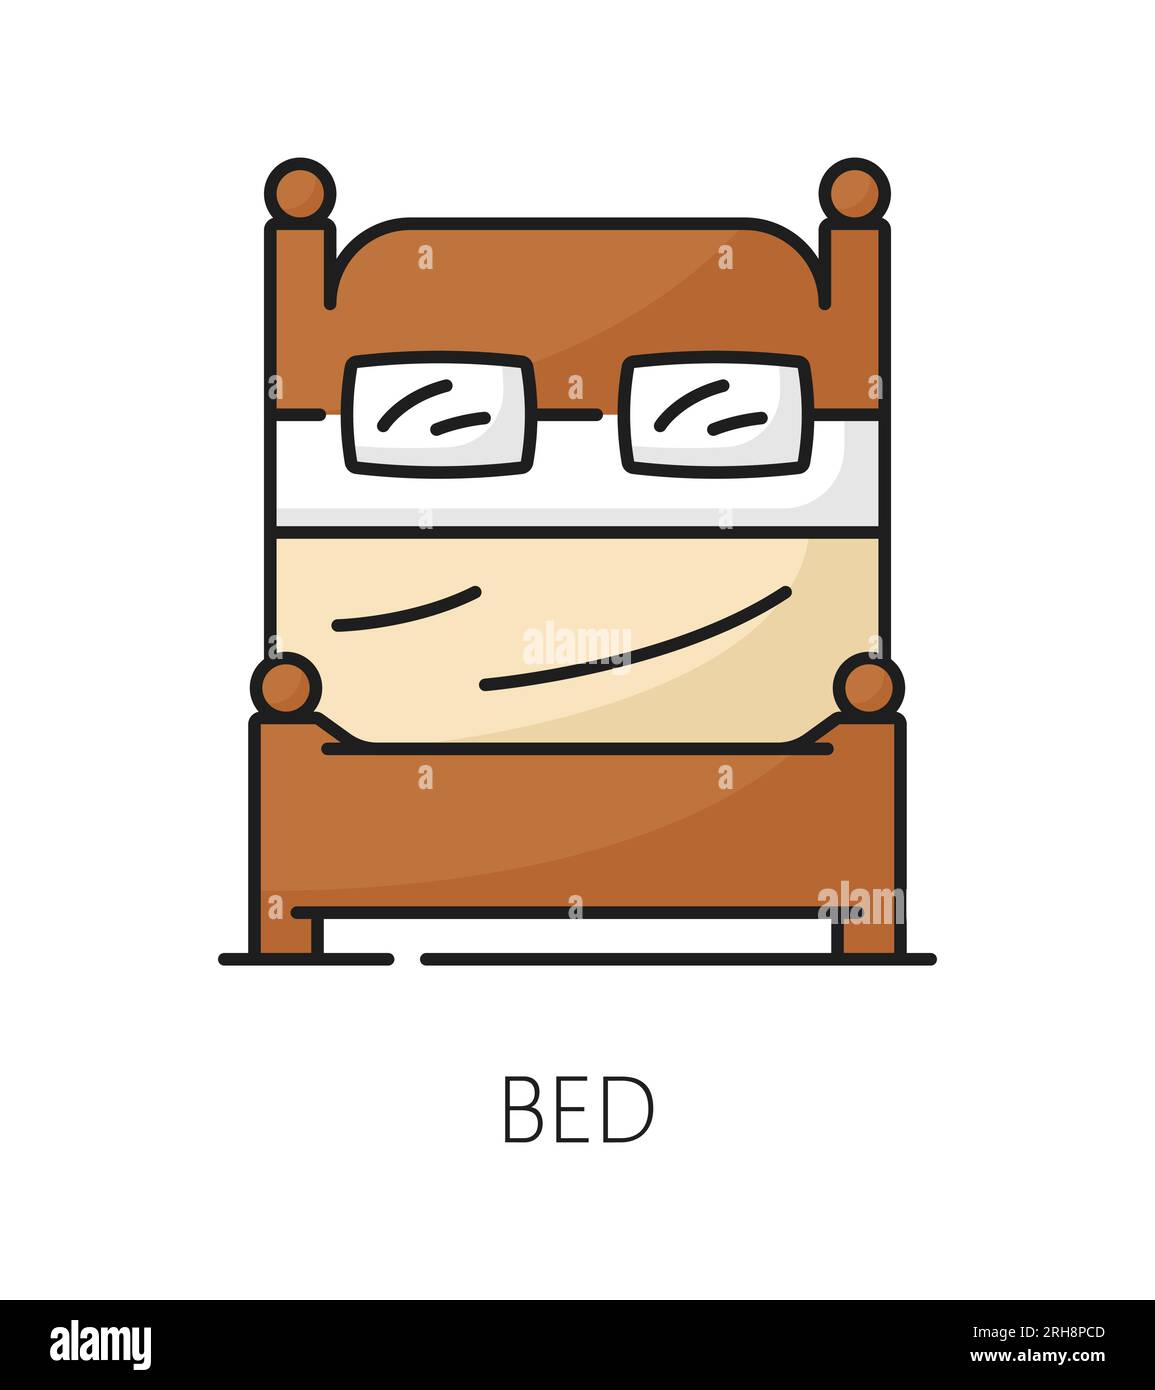 Bed furniture icon, home interior and bedroom room facility, vector line symbol. House couch or hotel bedroom double bed of wood in outline icon, living room lounge or household furniture pictogram Stock Vector